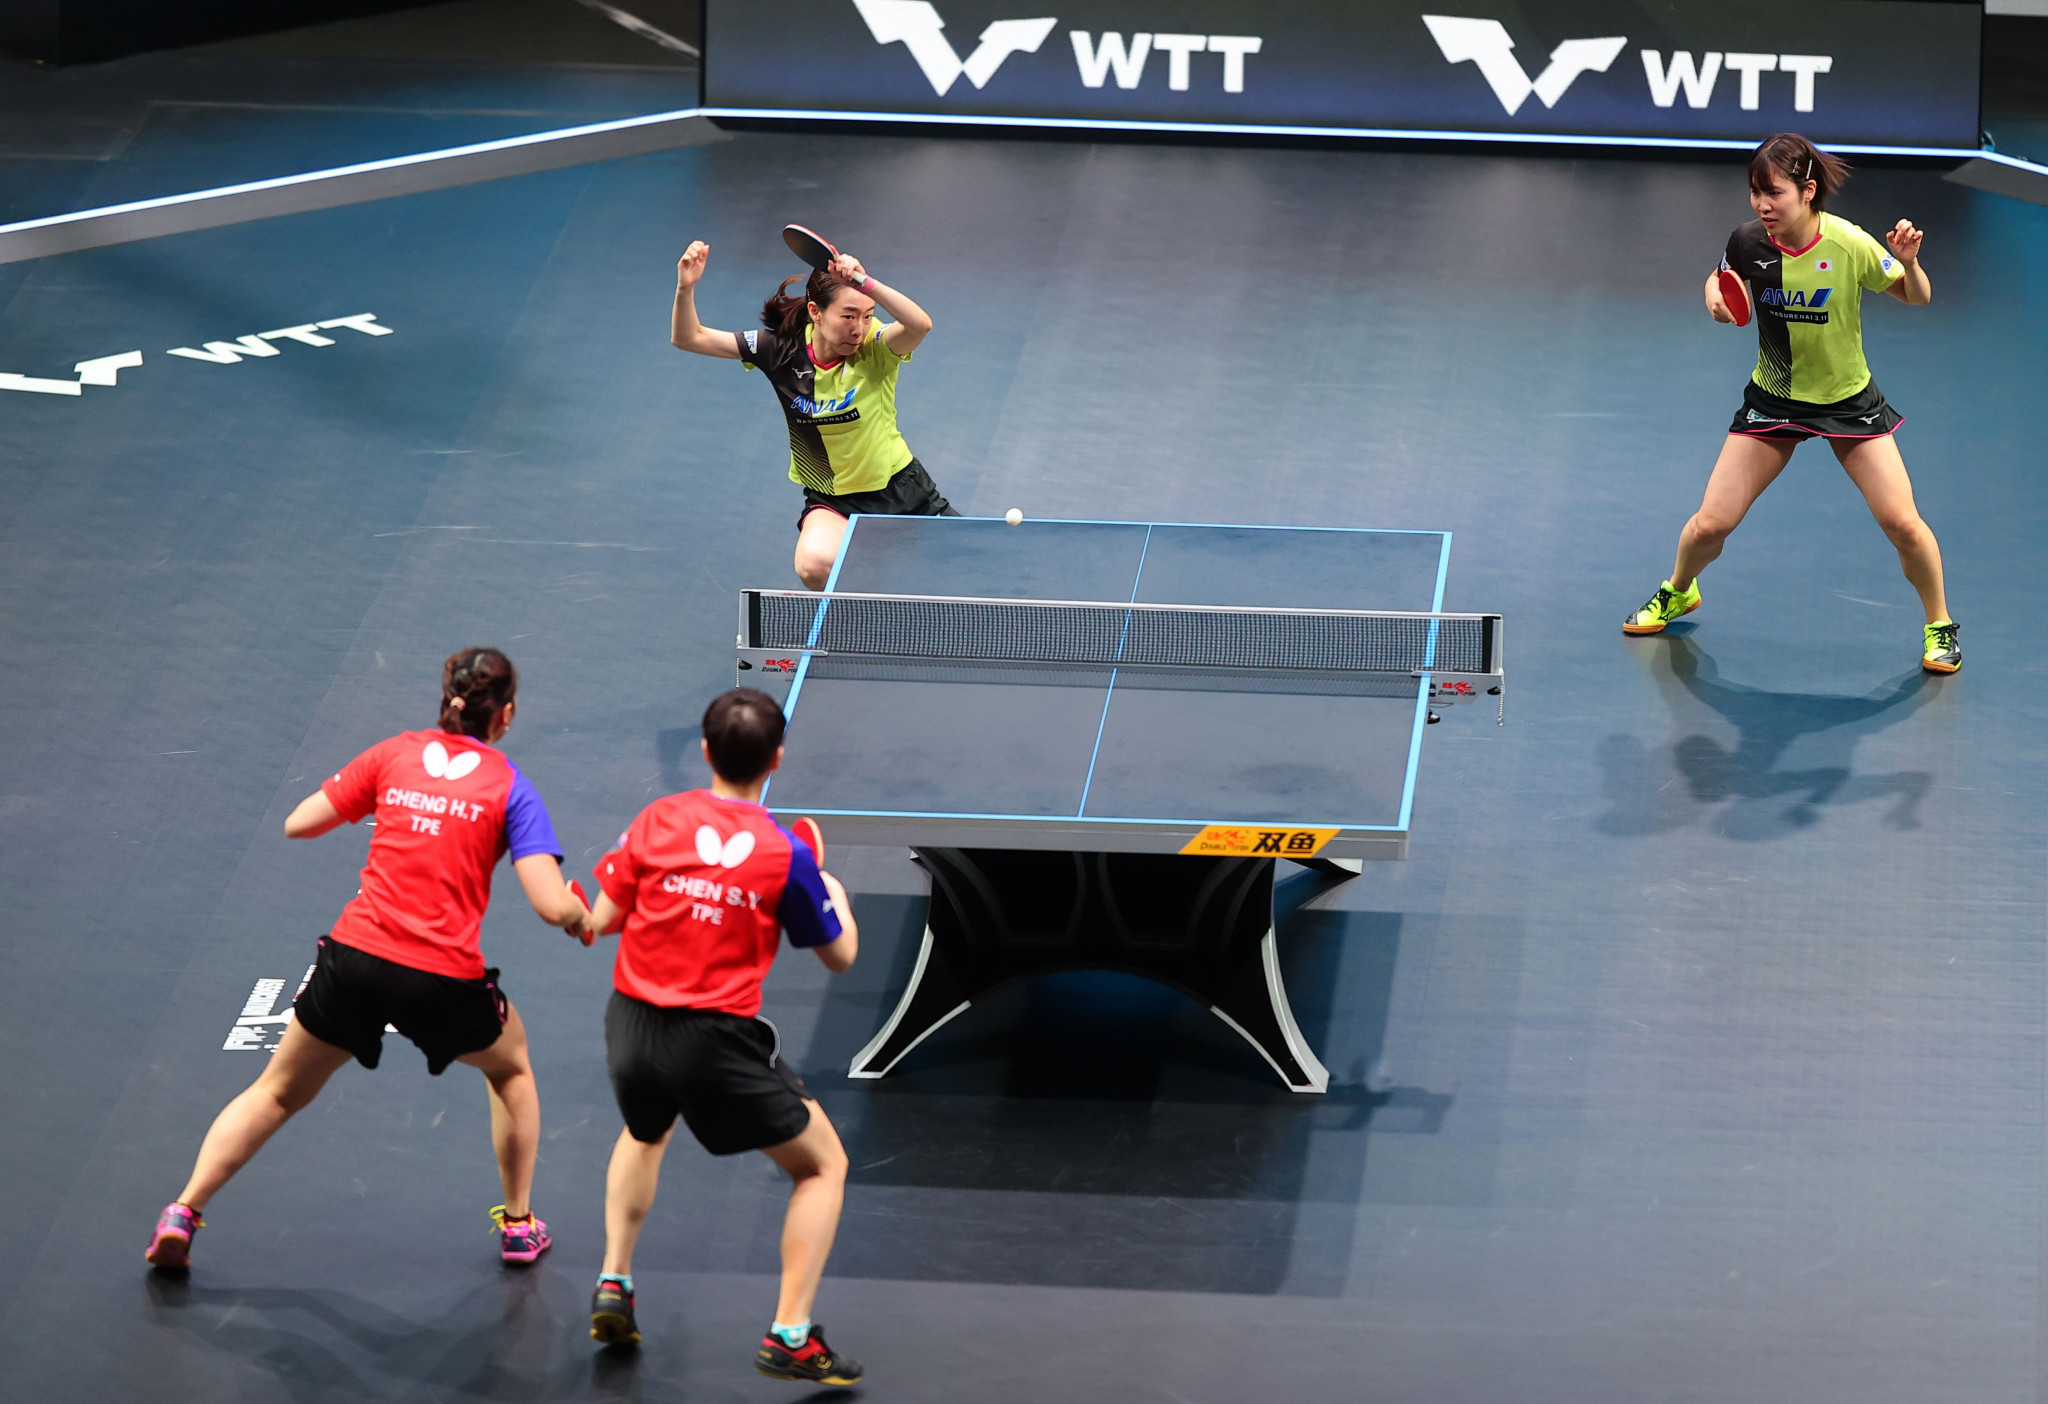 Double Fish will continue to provide equipment for WTT competitions ©Getty Images